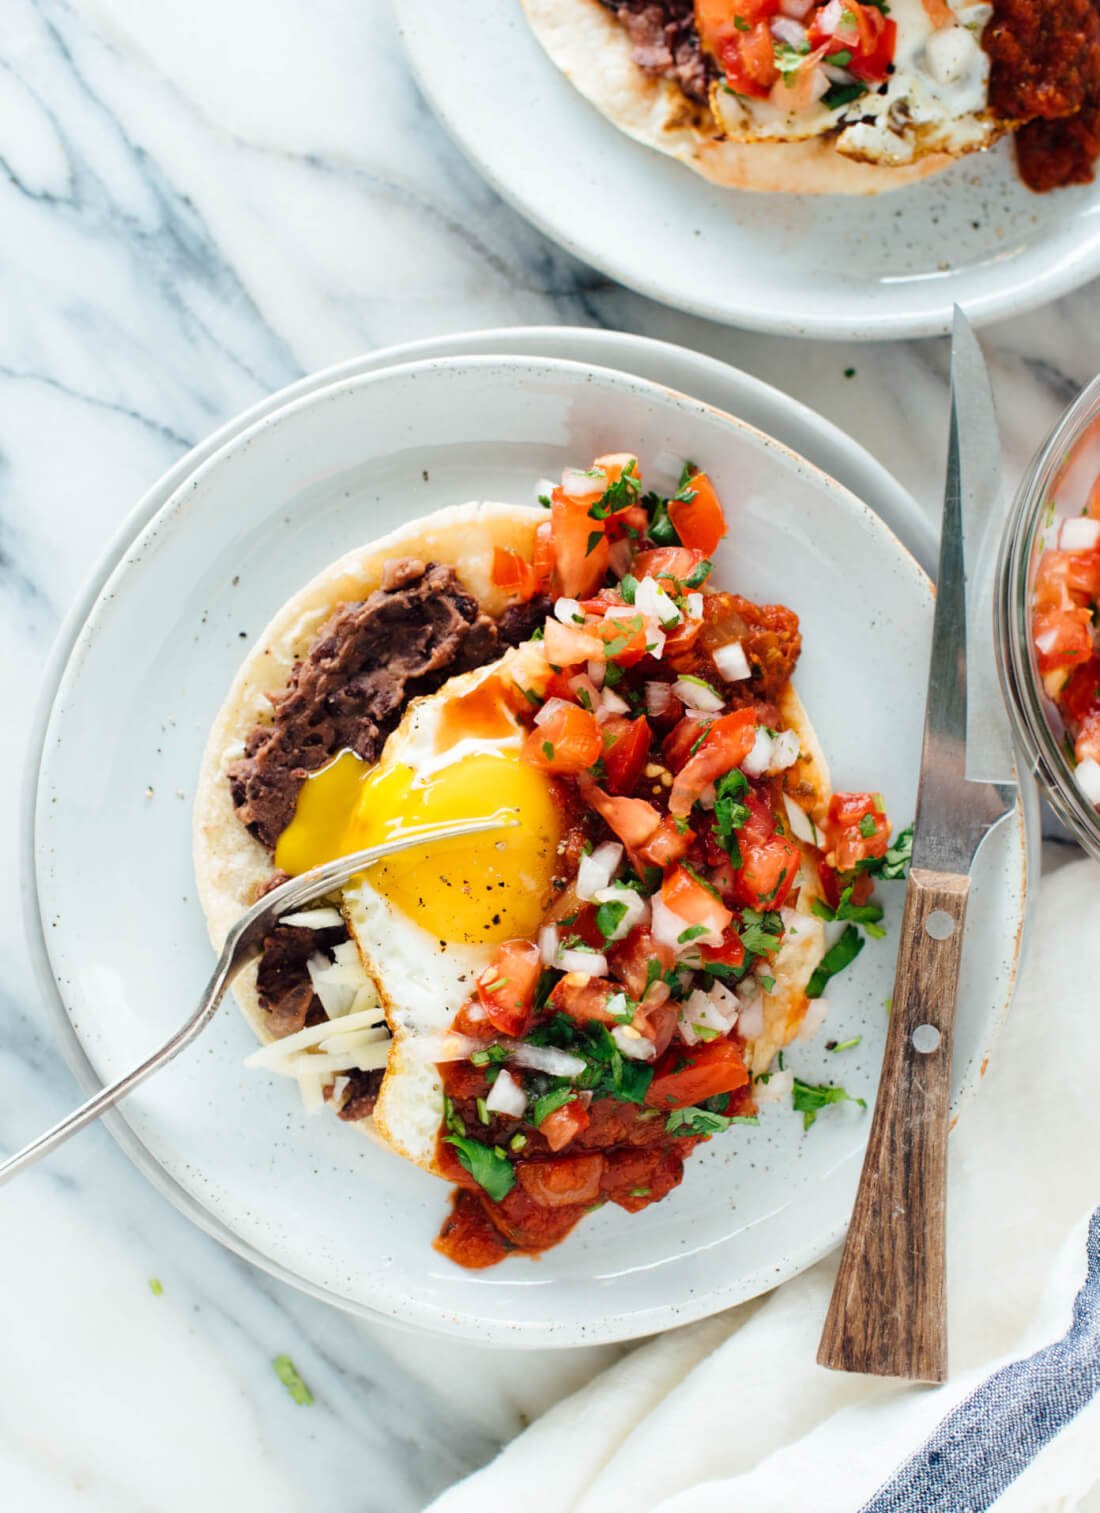 These homemade huevos rancheros are a hearty breakfast or dinner!